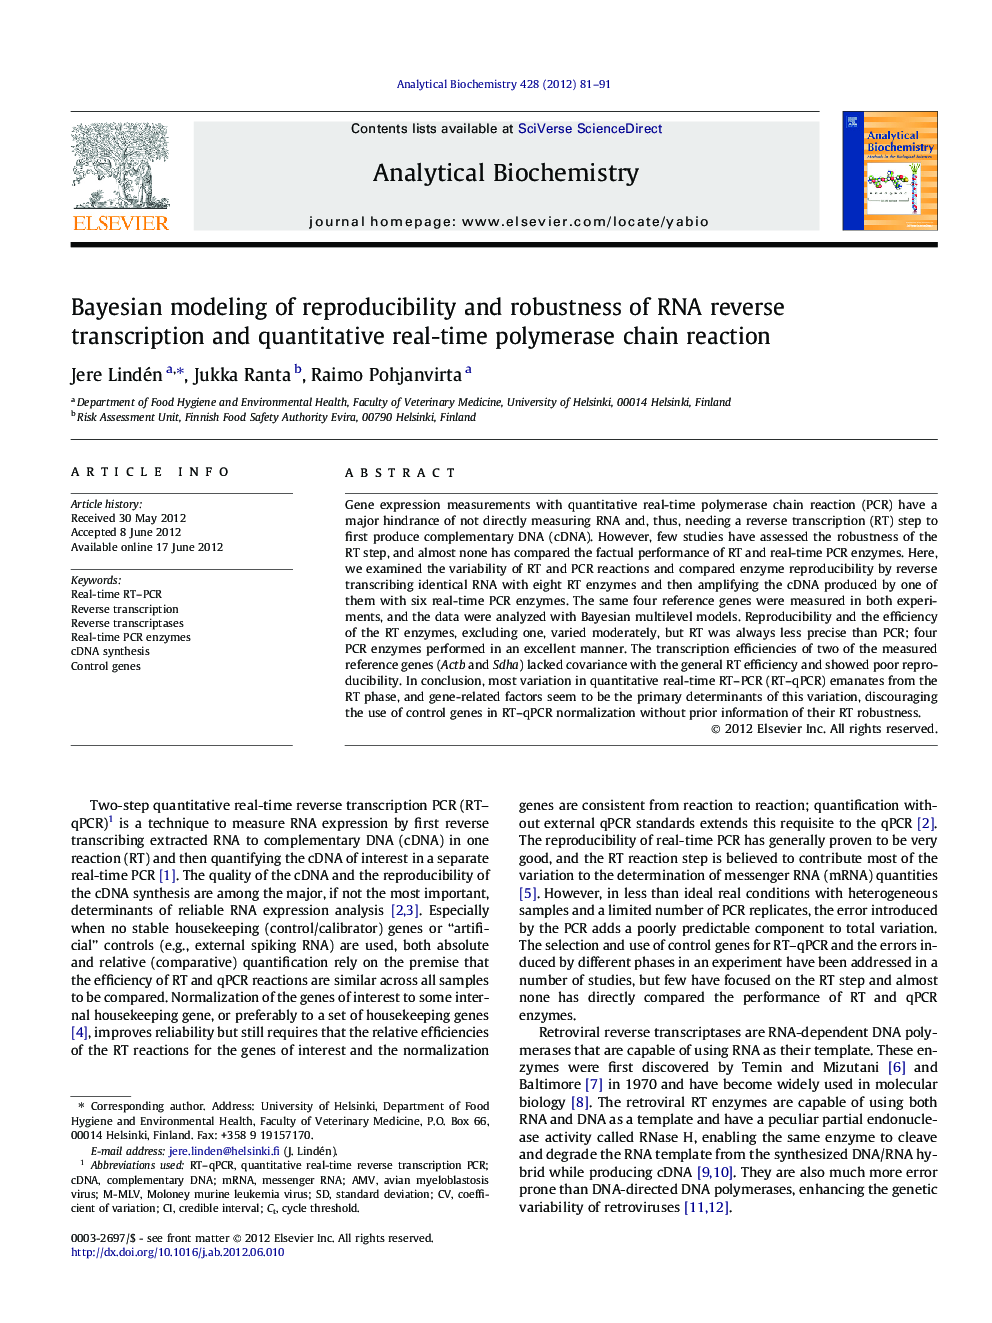 Bayesian modeling of reproducibility and robustness of RNA reverse transcription and quantitative real-time polymerase chain reaction